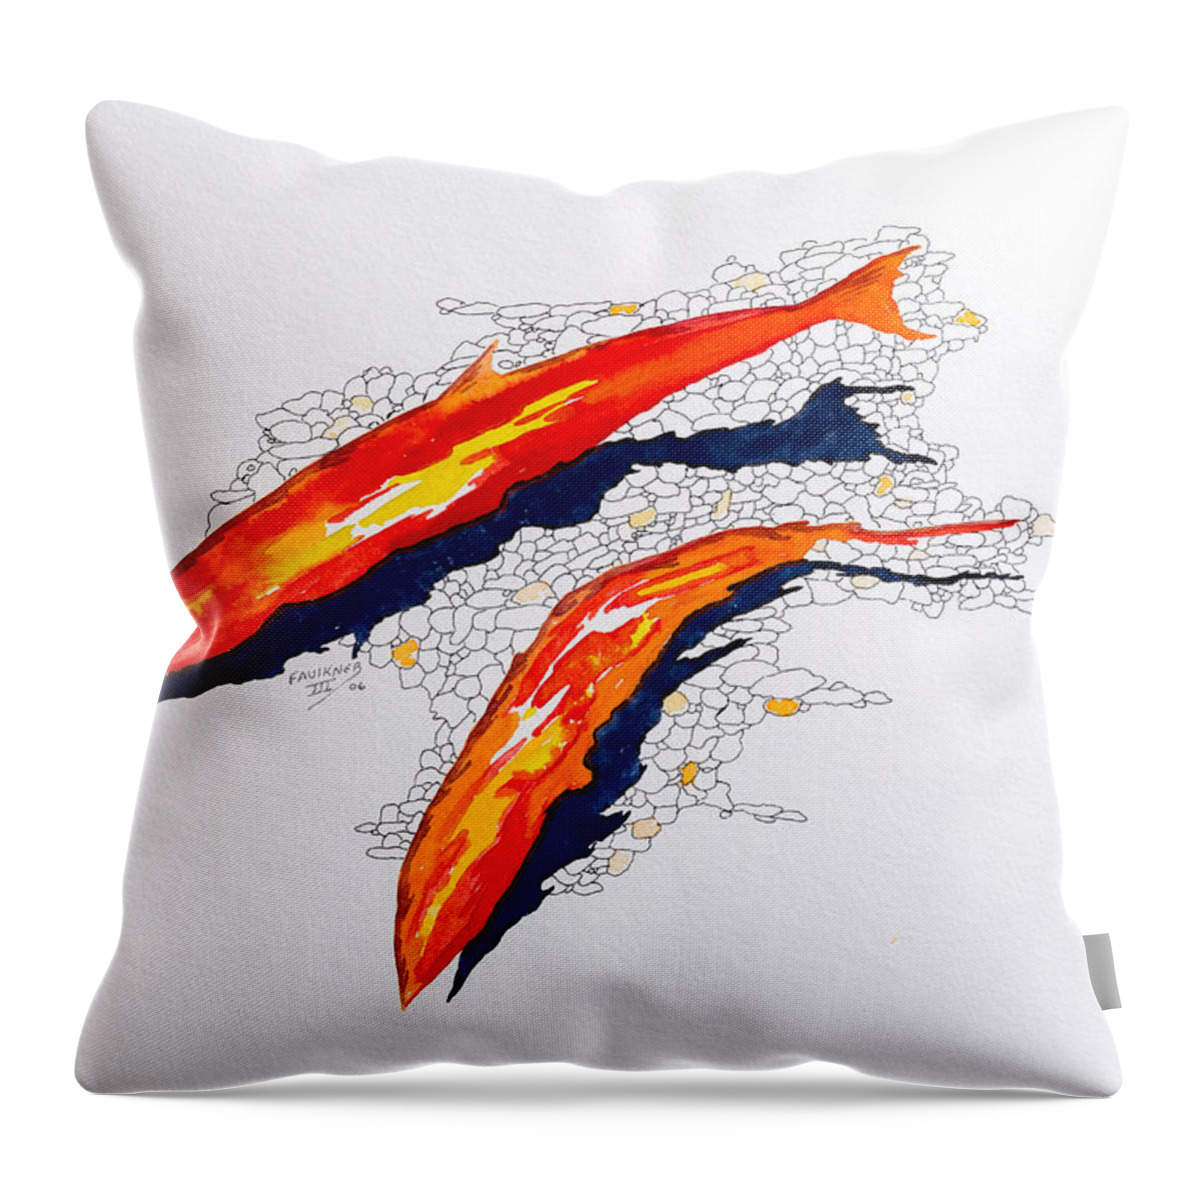 Abstract Throw Pillow featuring the painting Salmon Run by Richard Faulkner